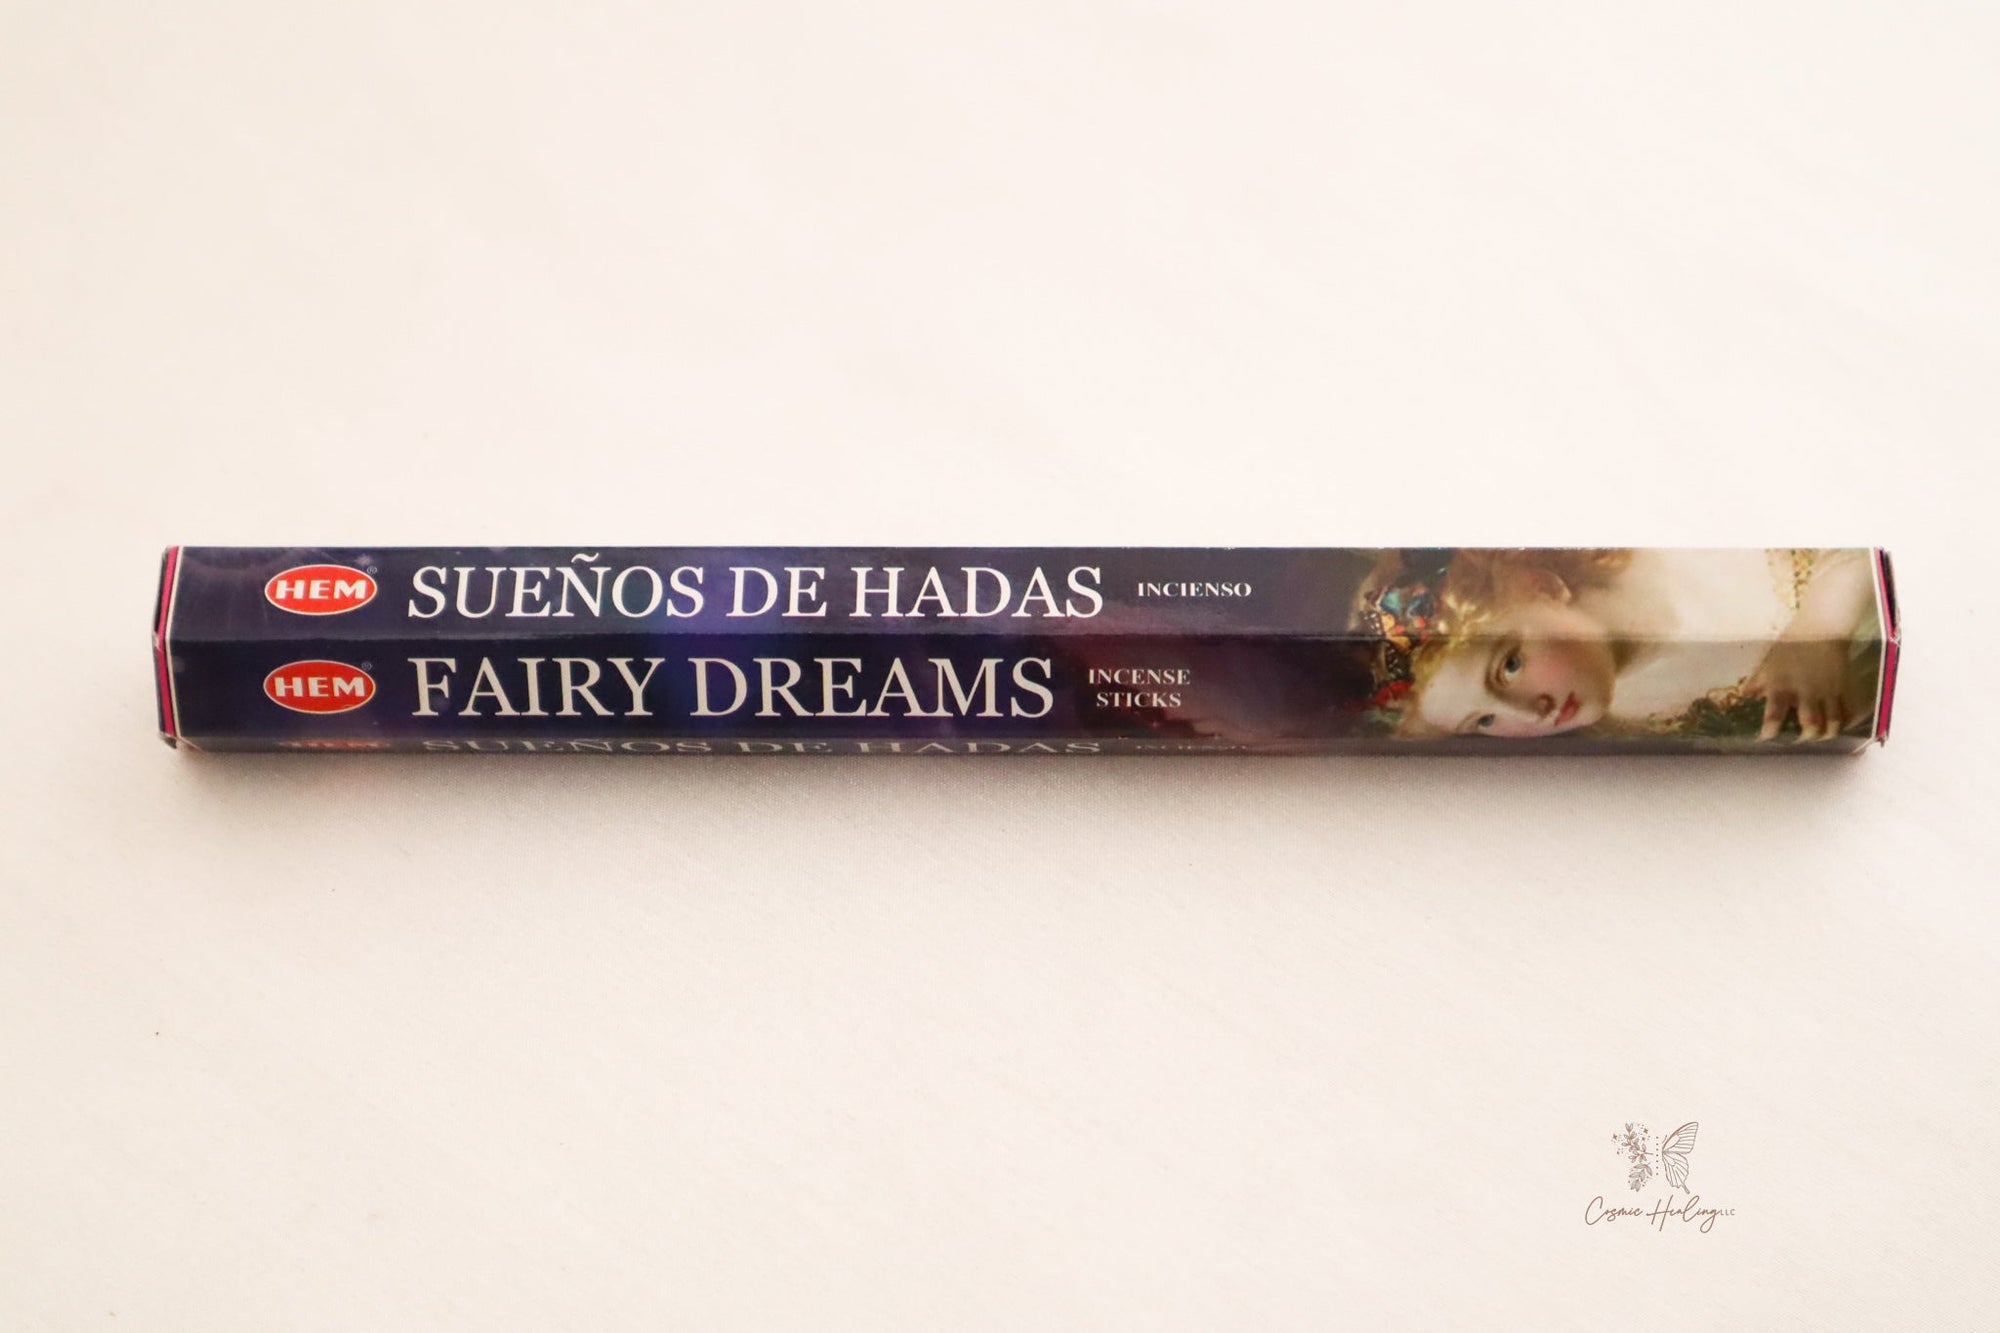 Fairy Dreams Incense - HEM (Incienso Sueños de Hadas)- to connect your mind, body, spirit with the ethereal energies of the Fae - Shop Cosmic Healing